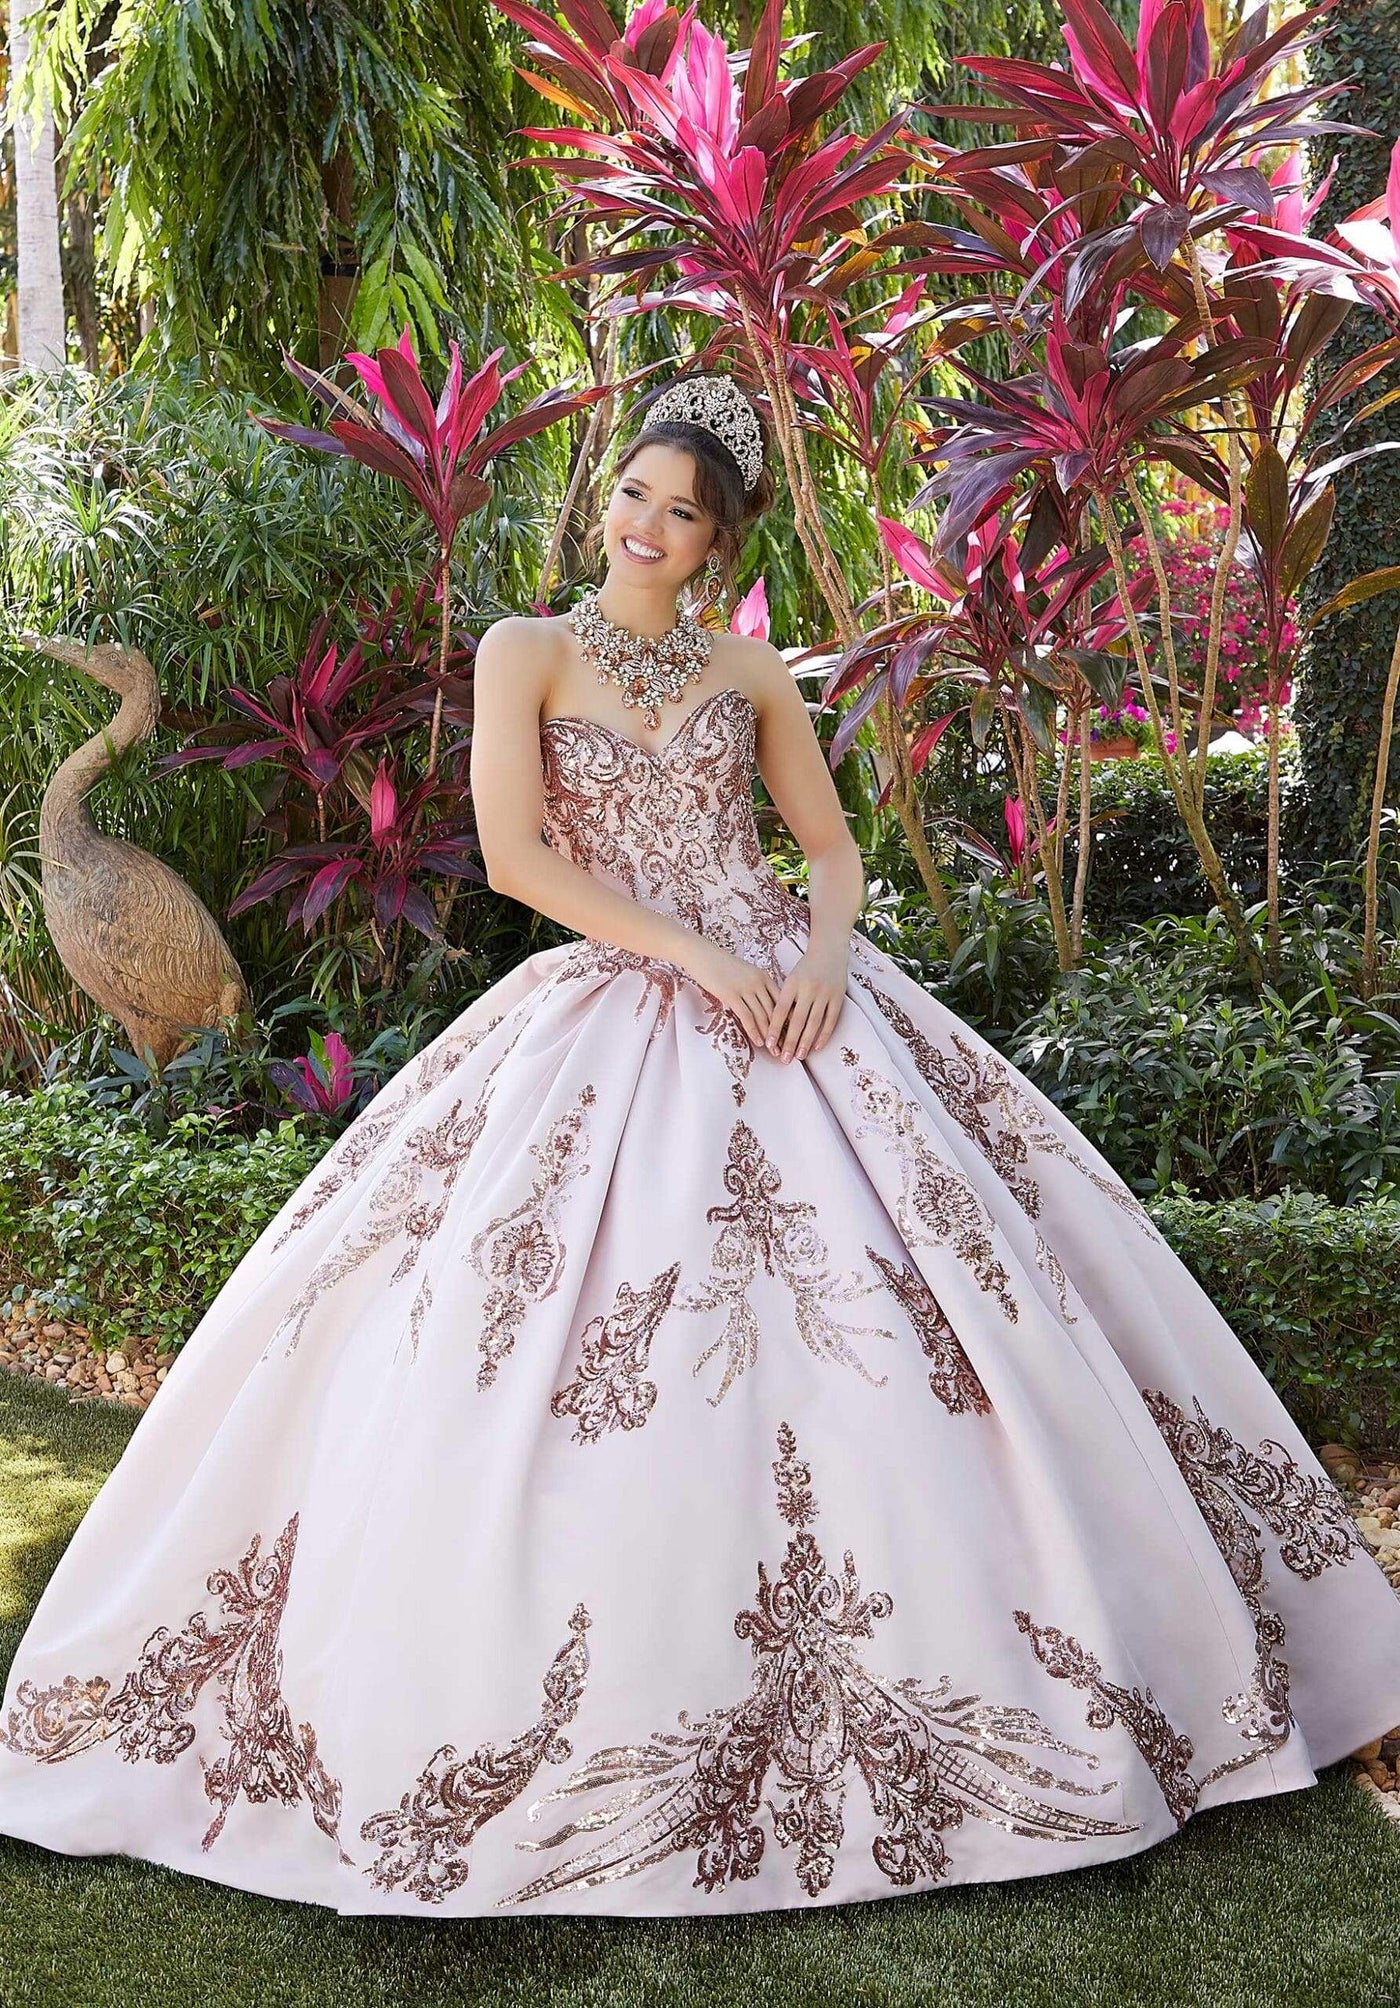 Vizcaya by Mori Lee - 60127 Strapless Crystal Beaded Satin Ballgown Quinceanera Dresses 0 / Blush/Rose Gold